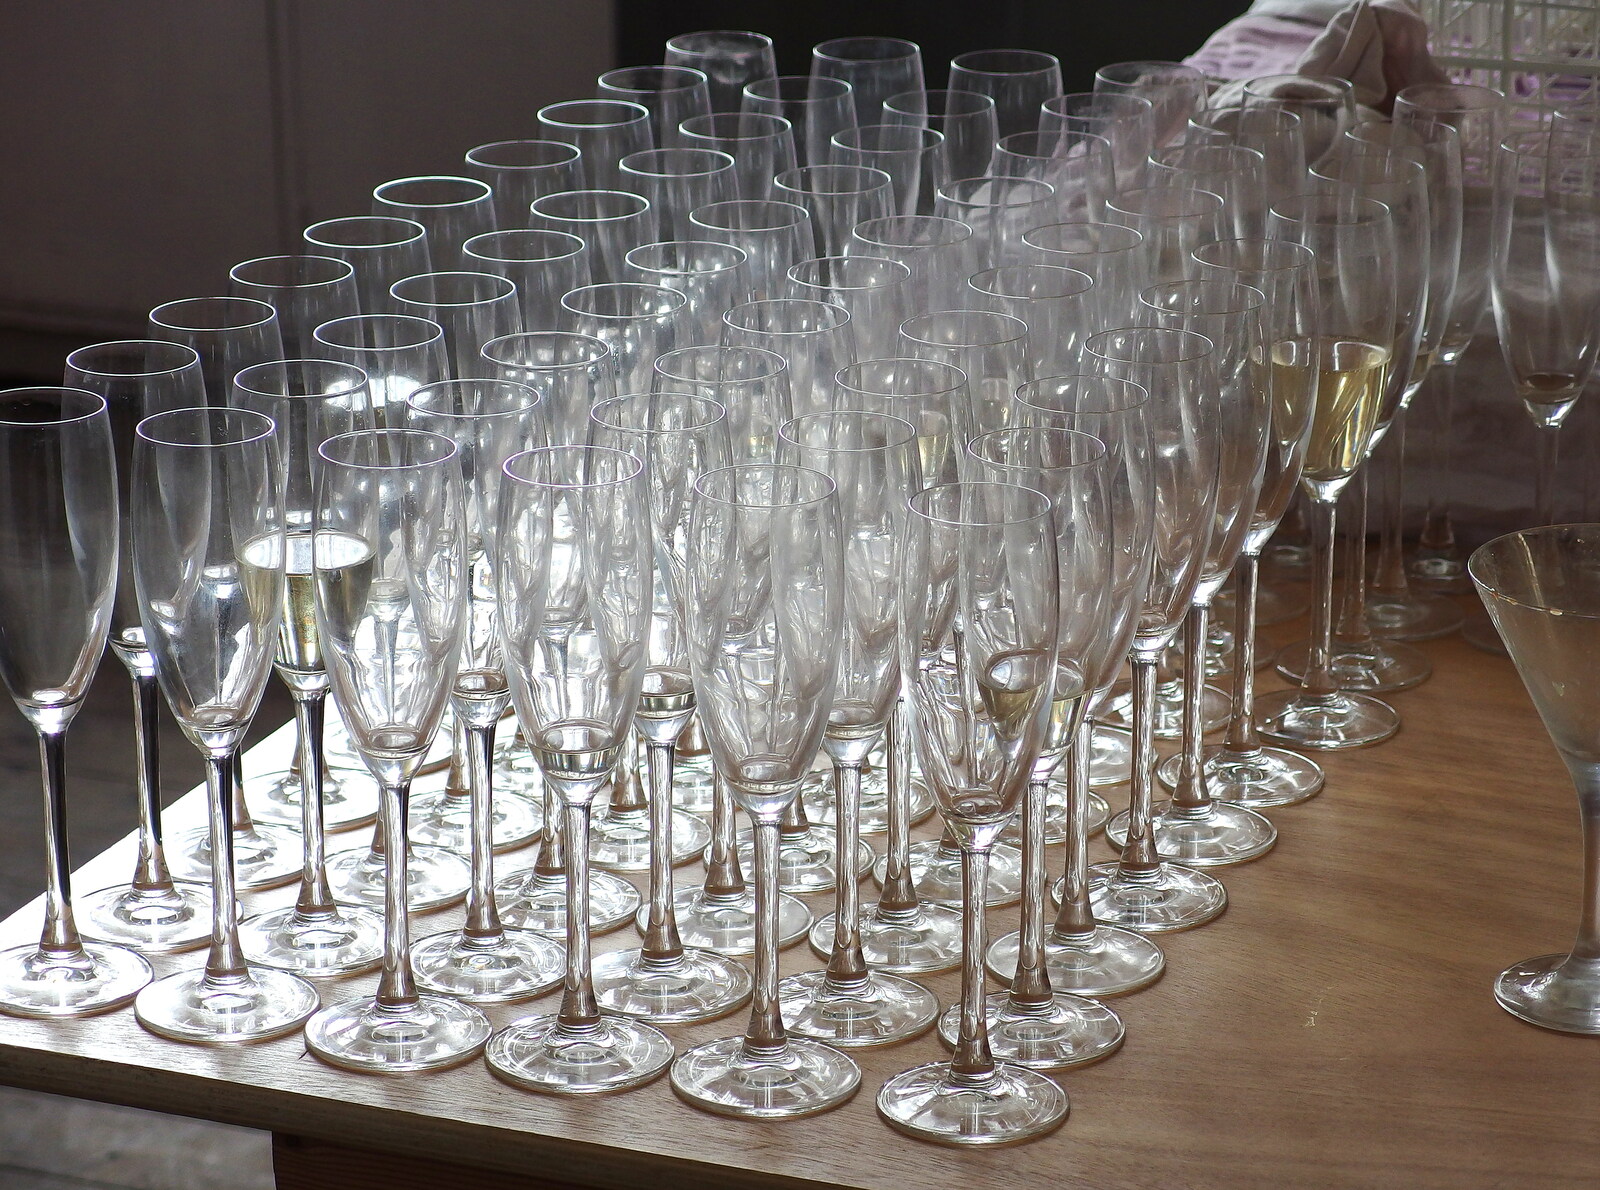 A stack of used champagne glasses from The BBs at Hengrave Hall, Hengrave, Suffolk - 18th August 2013